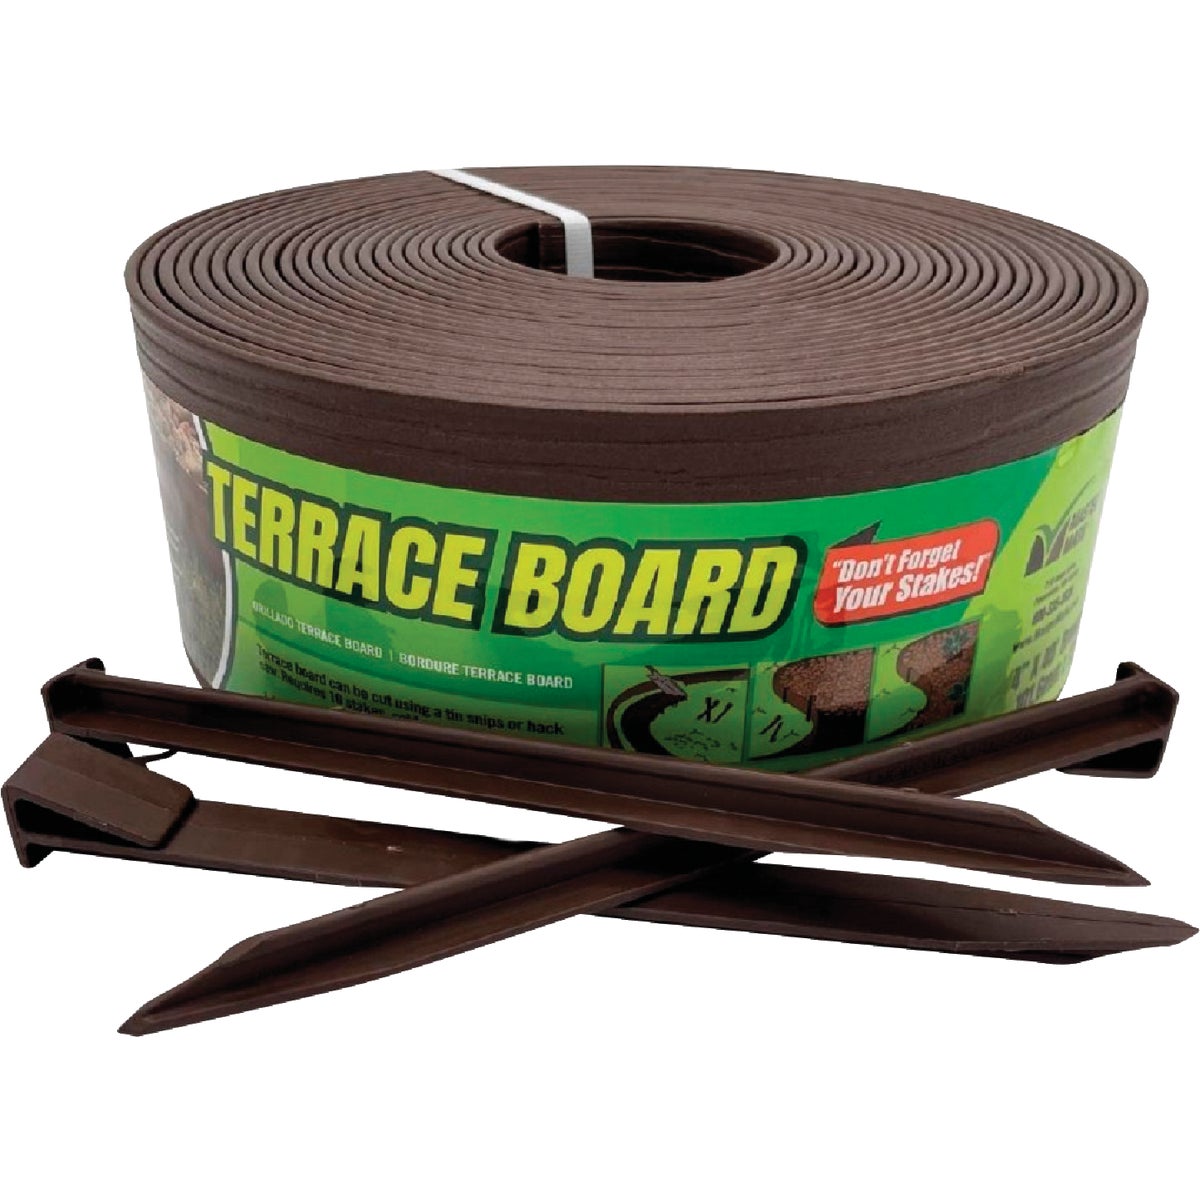 Item 702278, Terrace Board provides a textured, wood grained look to edging.